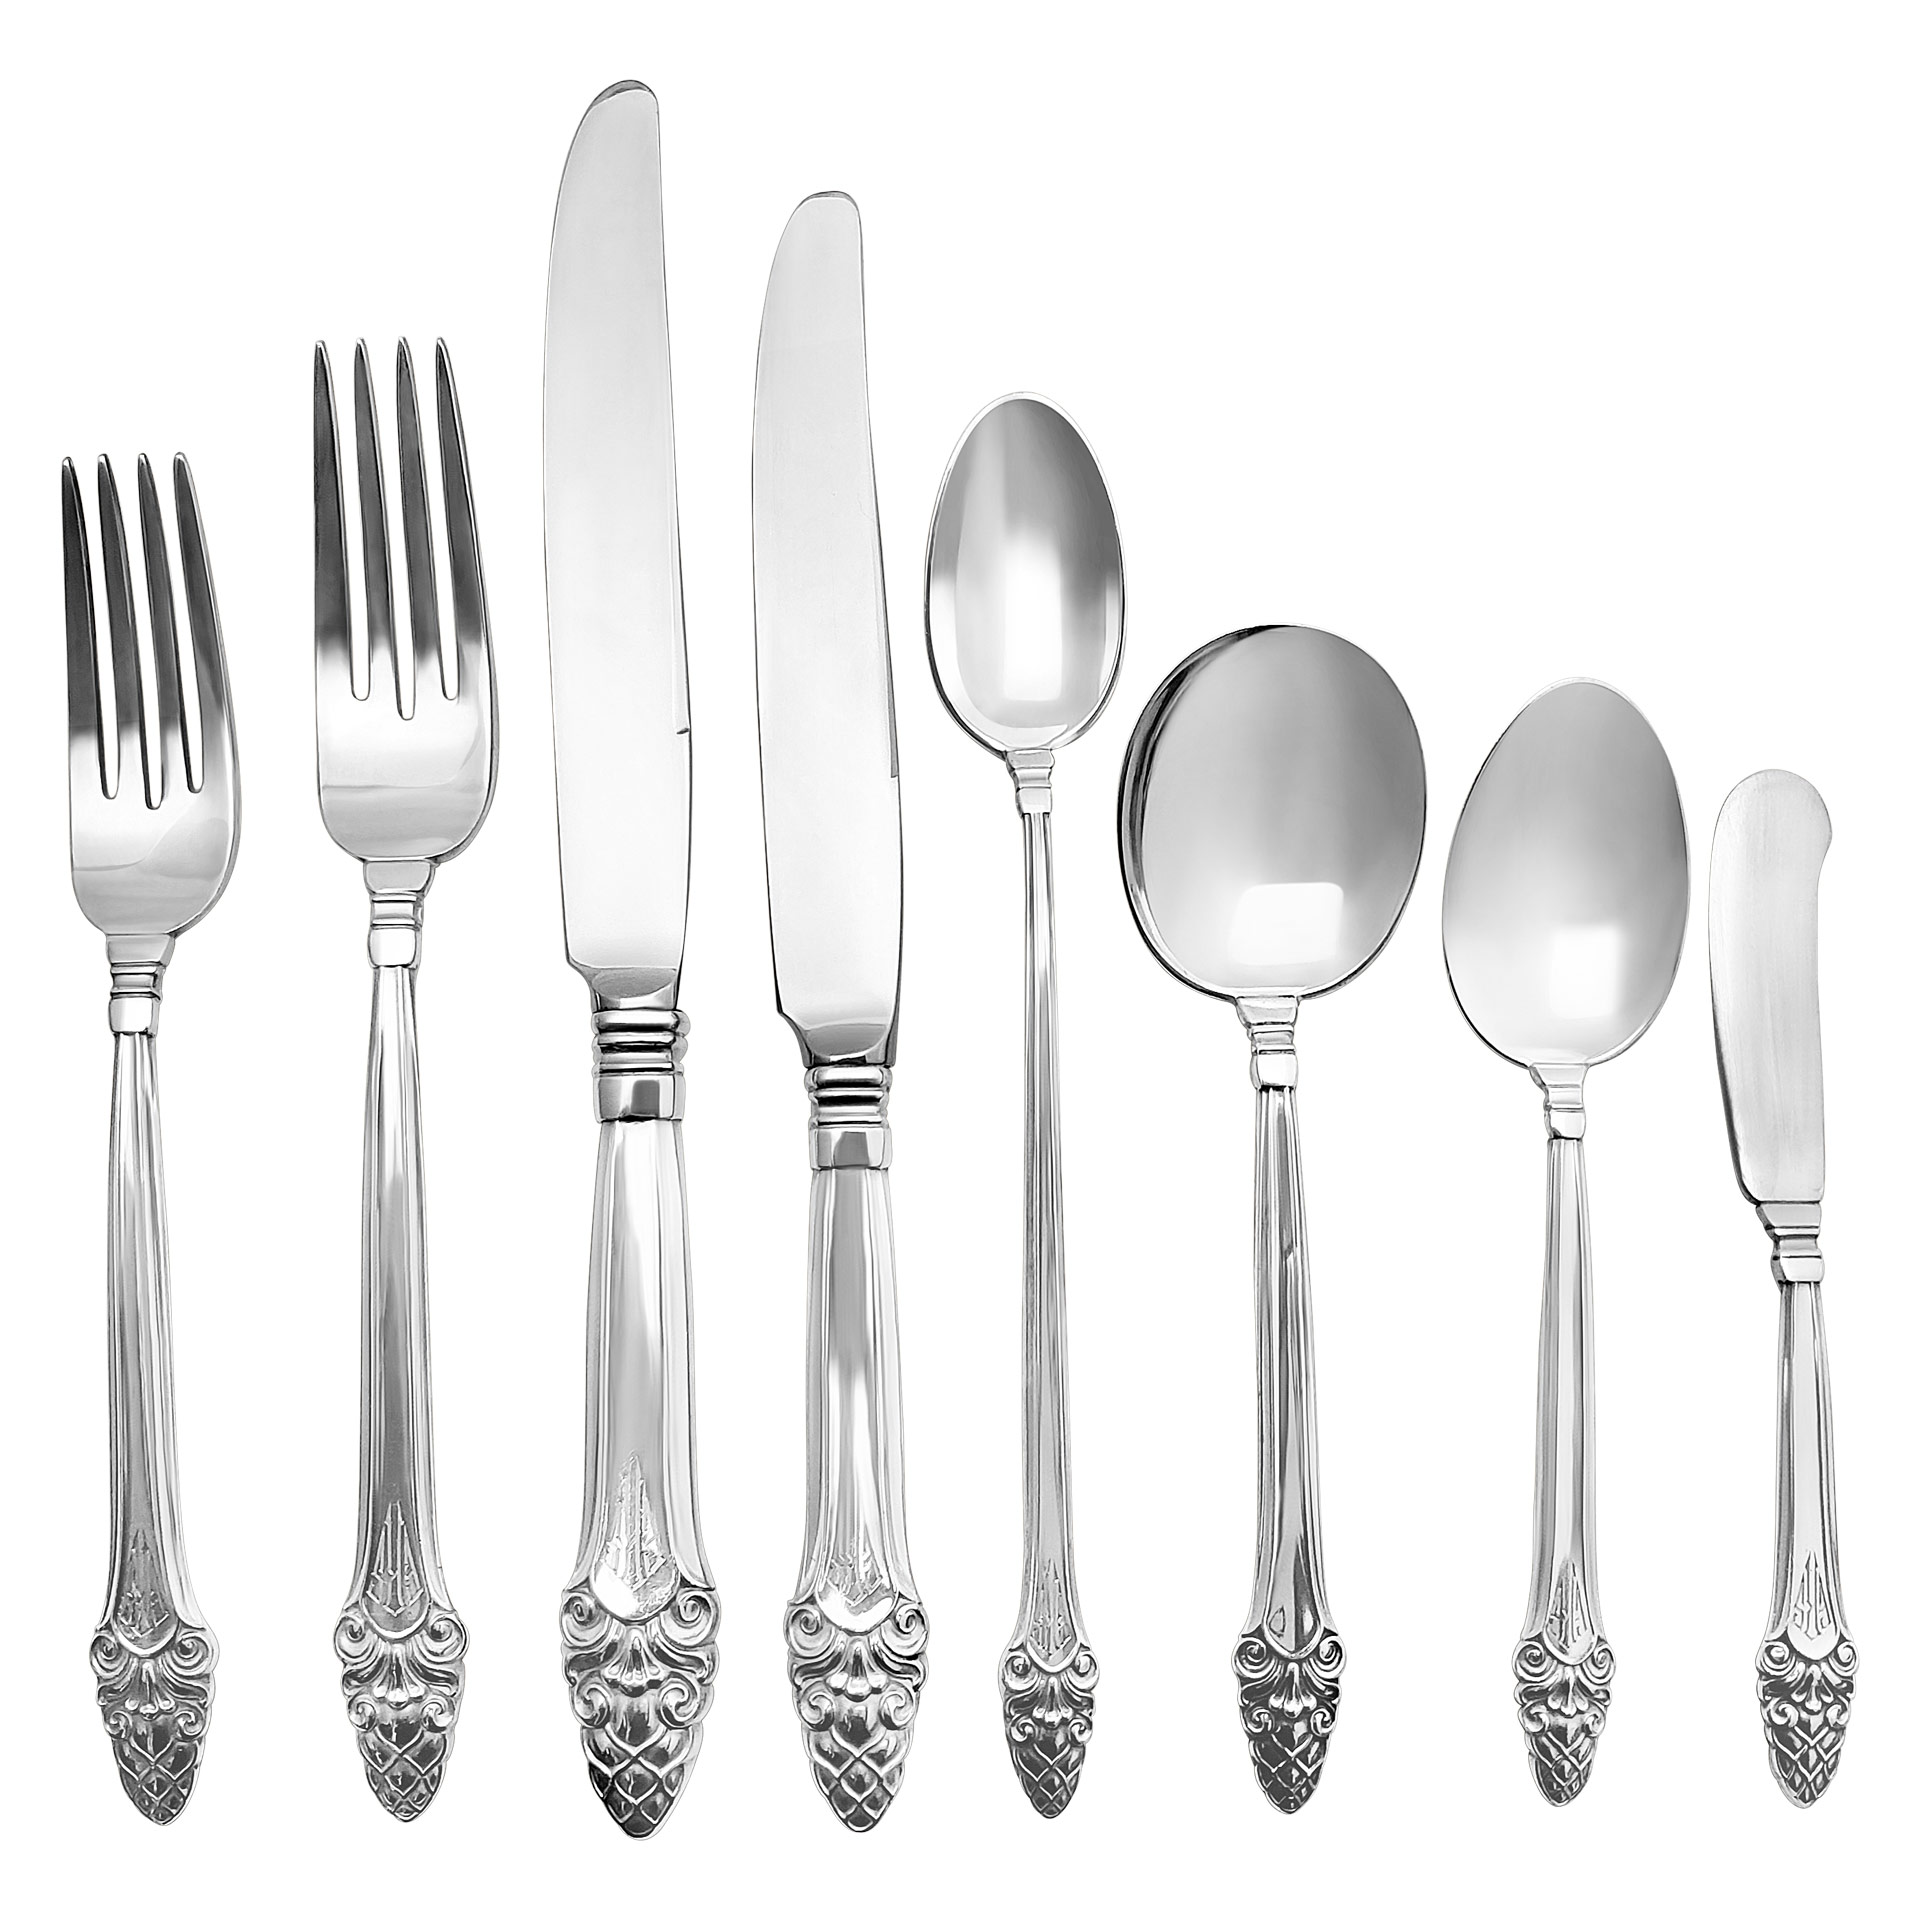 "SOVEREIGN, OLD" Sterling Silver Flatware Set patented in 1941 by Gorham- 9 place setting for 12 (Dinner & Lunch) + 9 serving pieces. Over 5000 grams sterling silver. COMPLETE HEAVY STERLING SET FOR ALL YOUR ENTERTAINING OCCASION. image 1